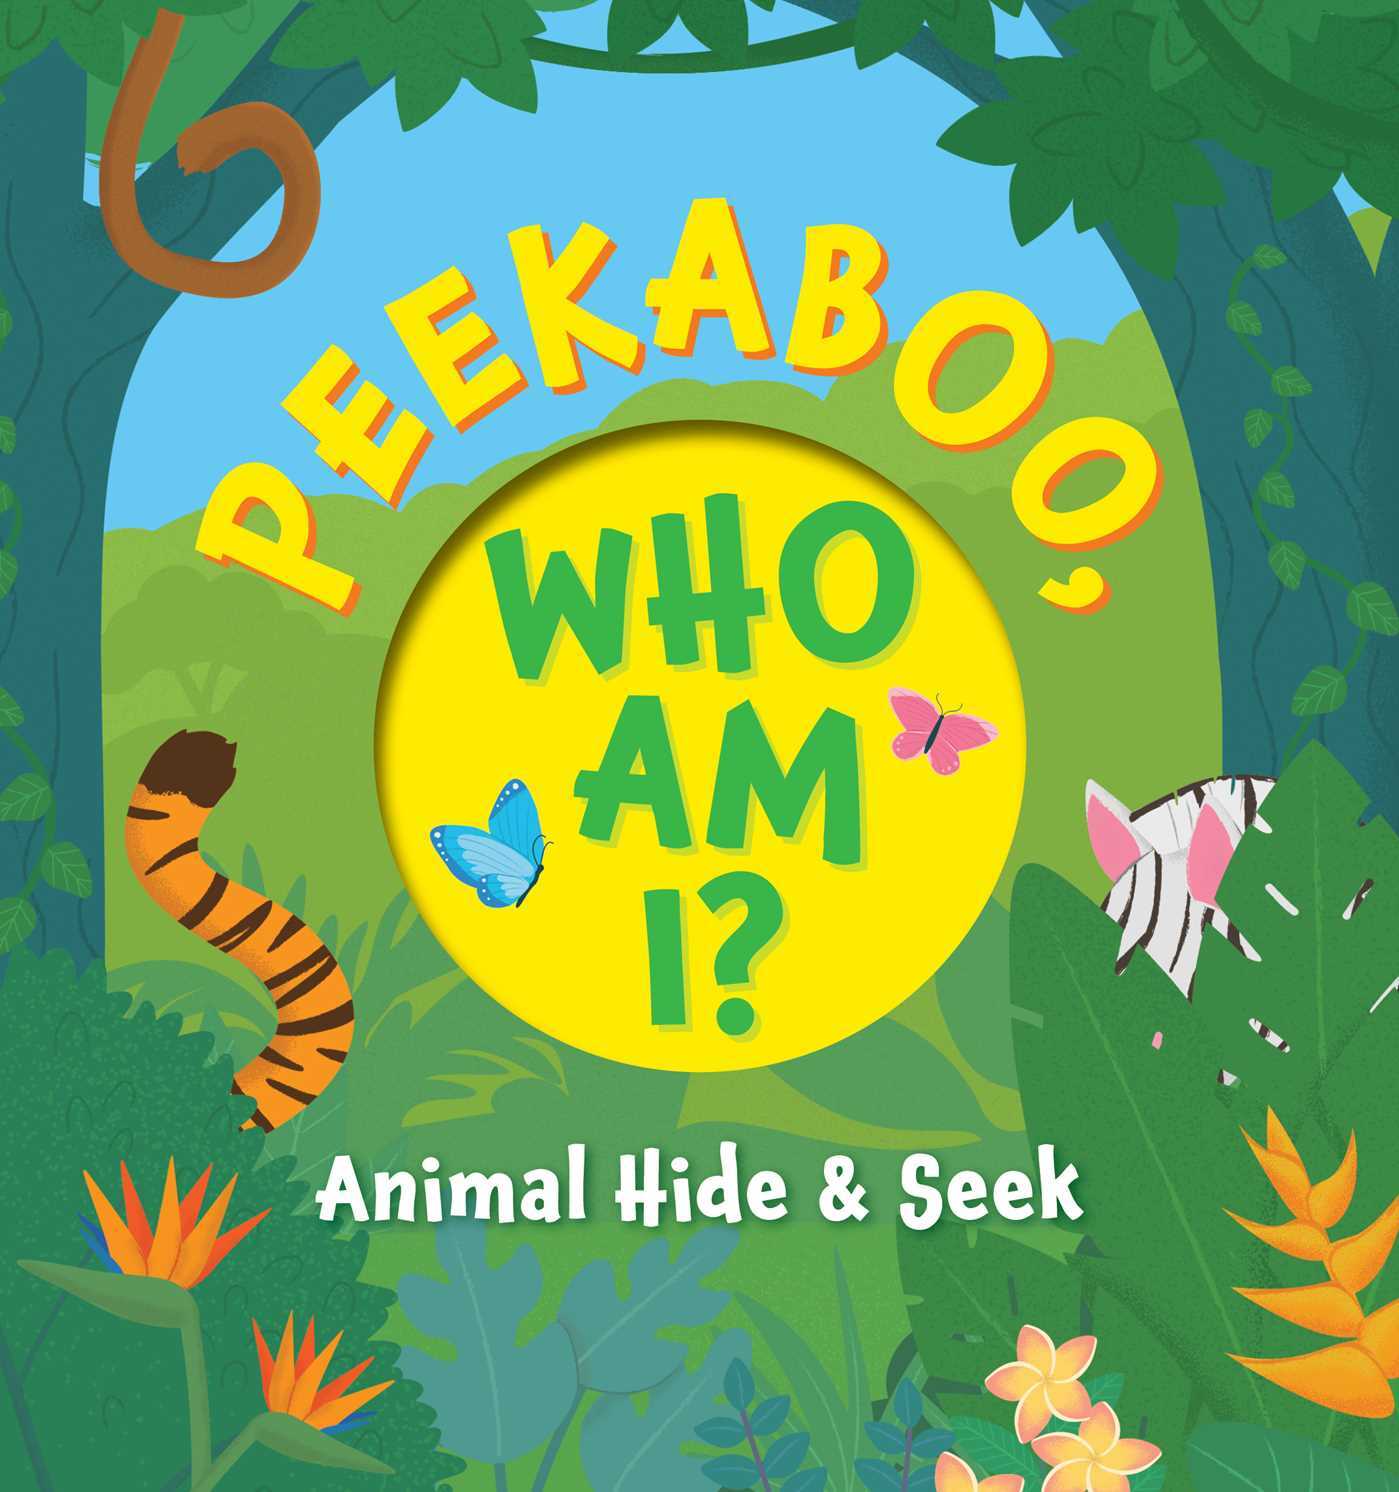 Kaboo What Am I My First Book Of Shapes And Colors Lift The Flap Interactive Board Books For Babies Toddlers